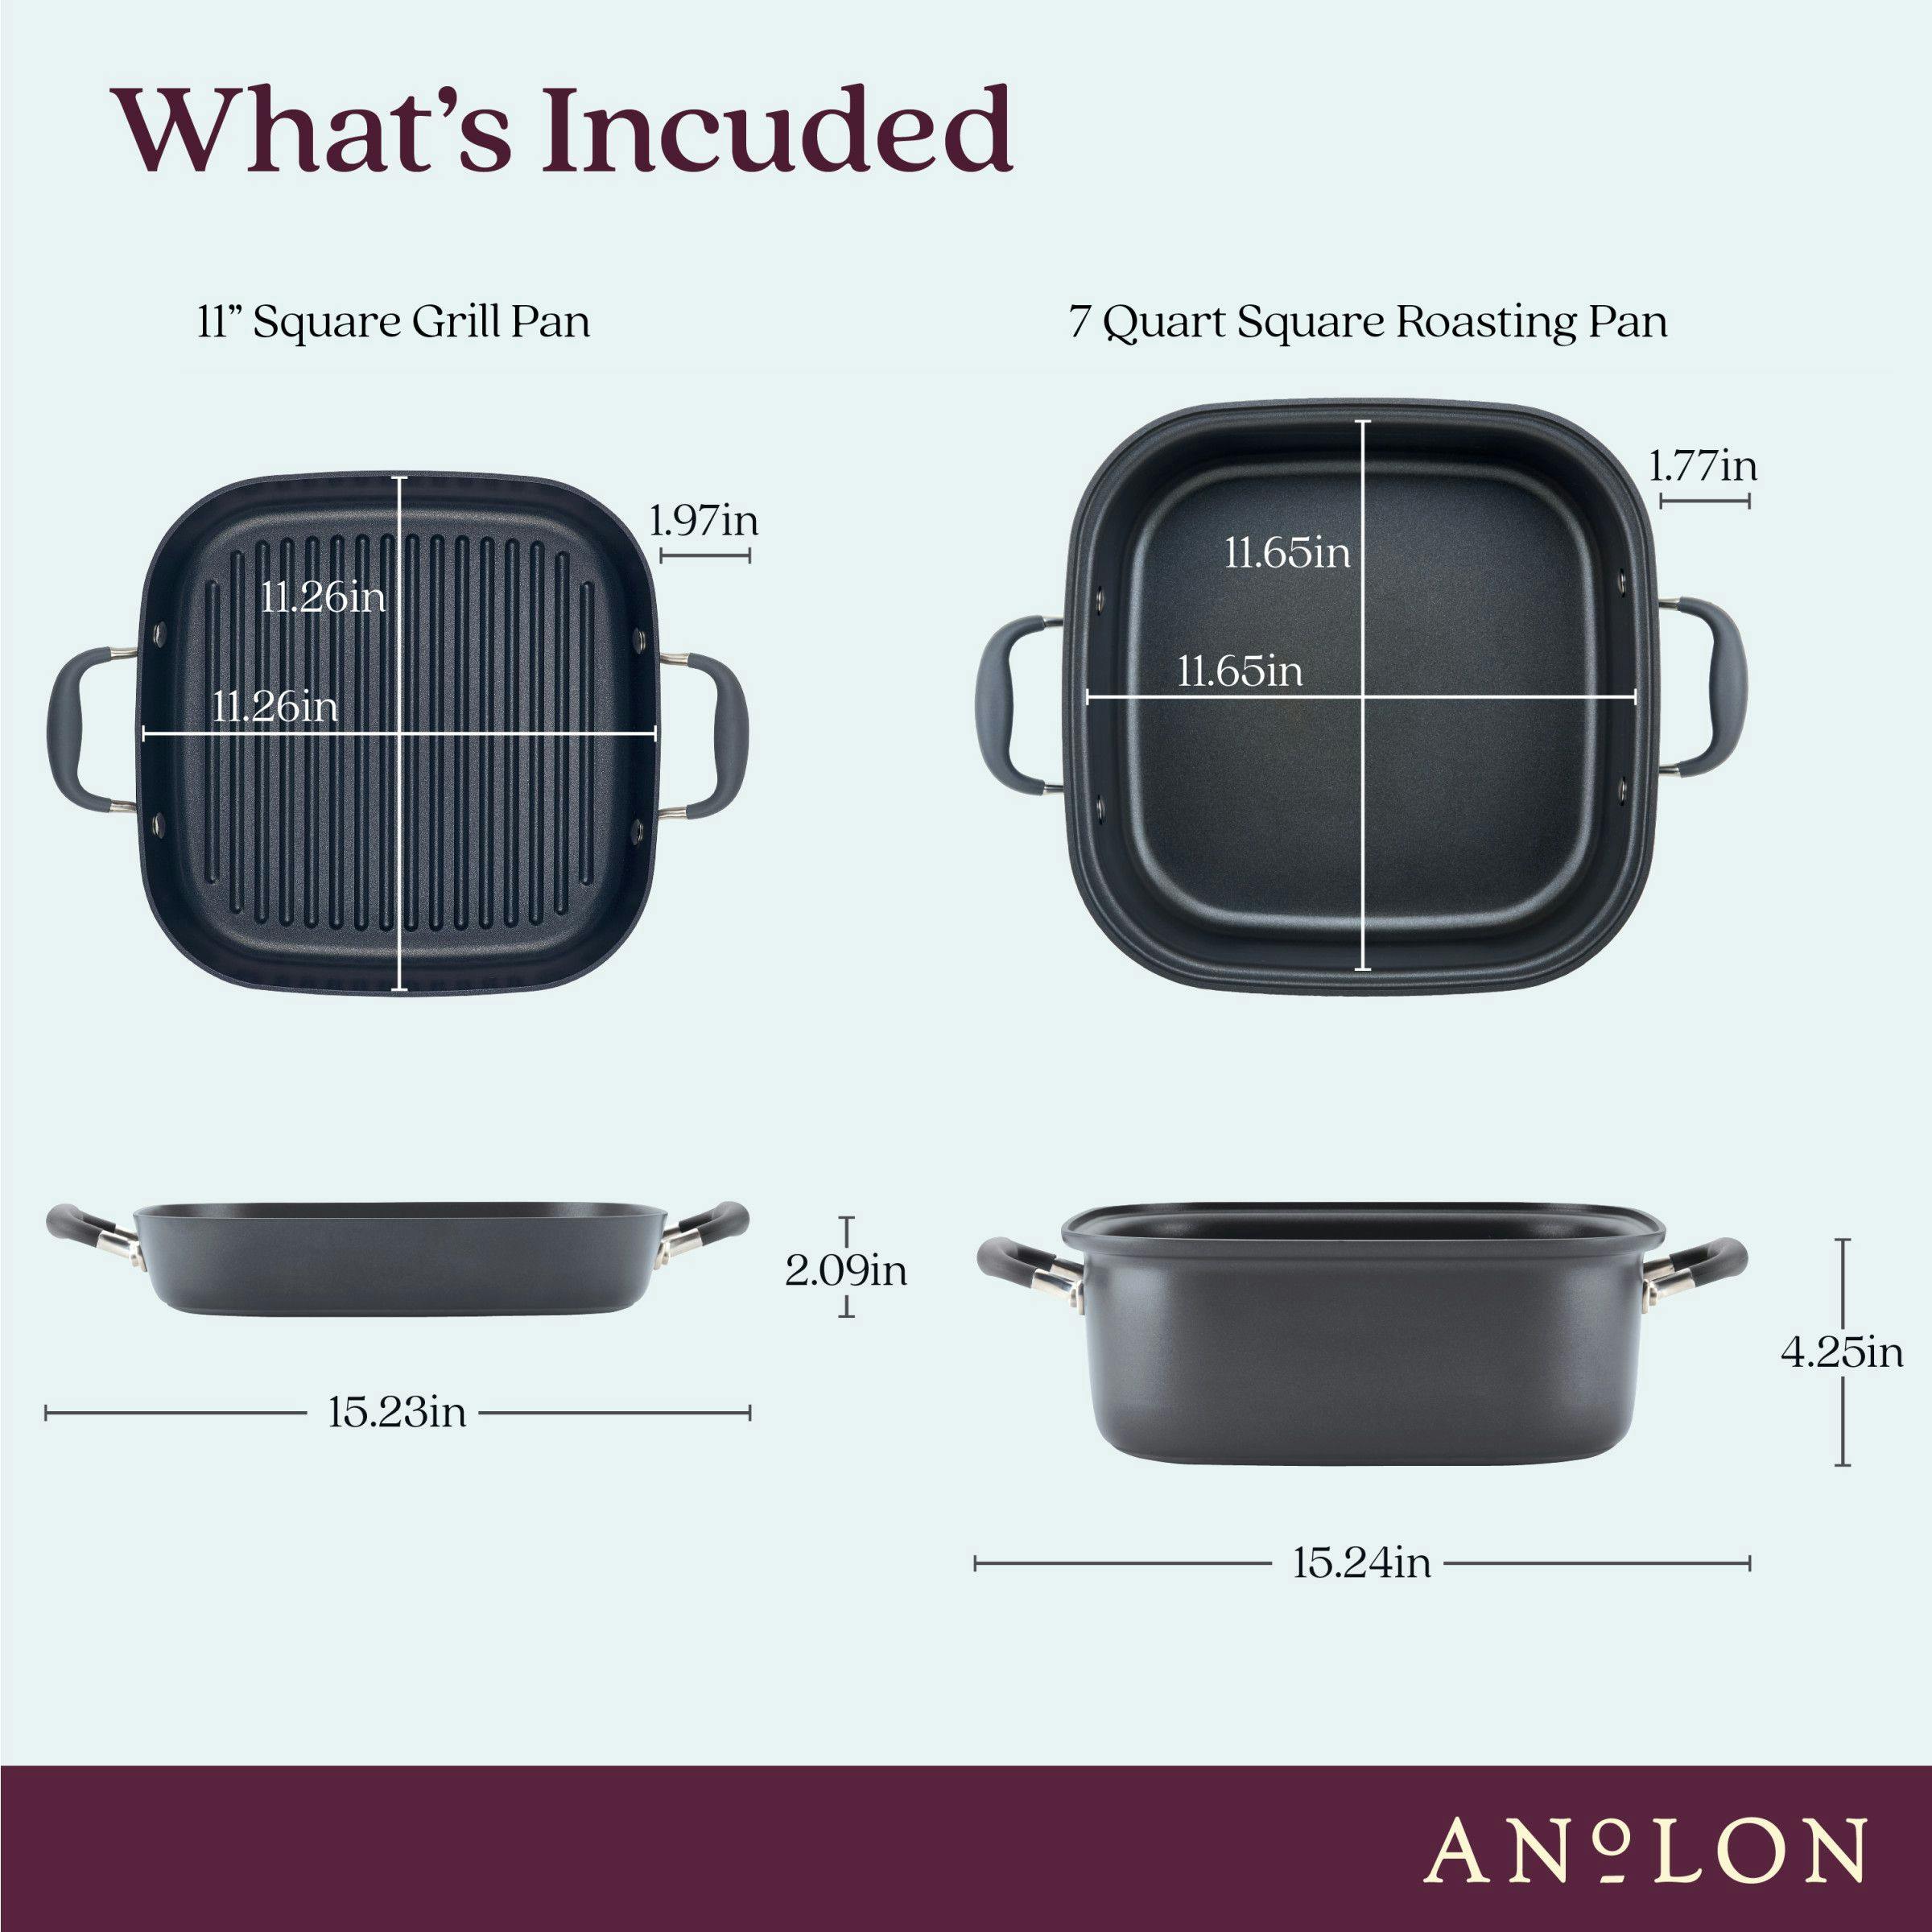 Anolon Advanced Hard Anodized Nonstick Two Step Meal Combo Cookware Set, 2-Piece, Moonstone